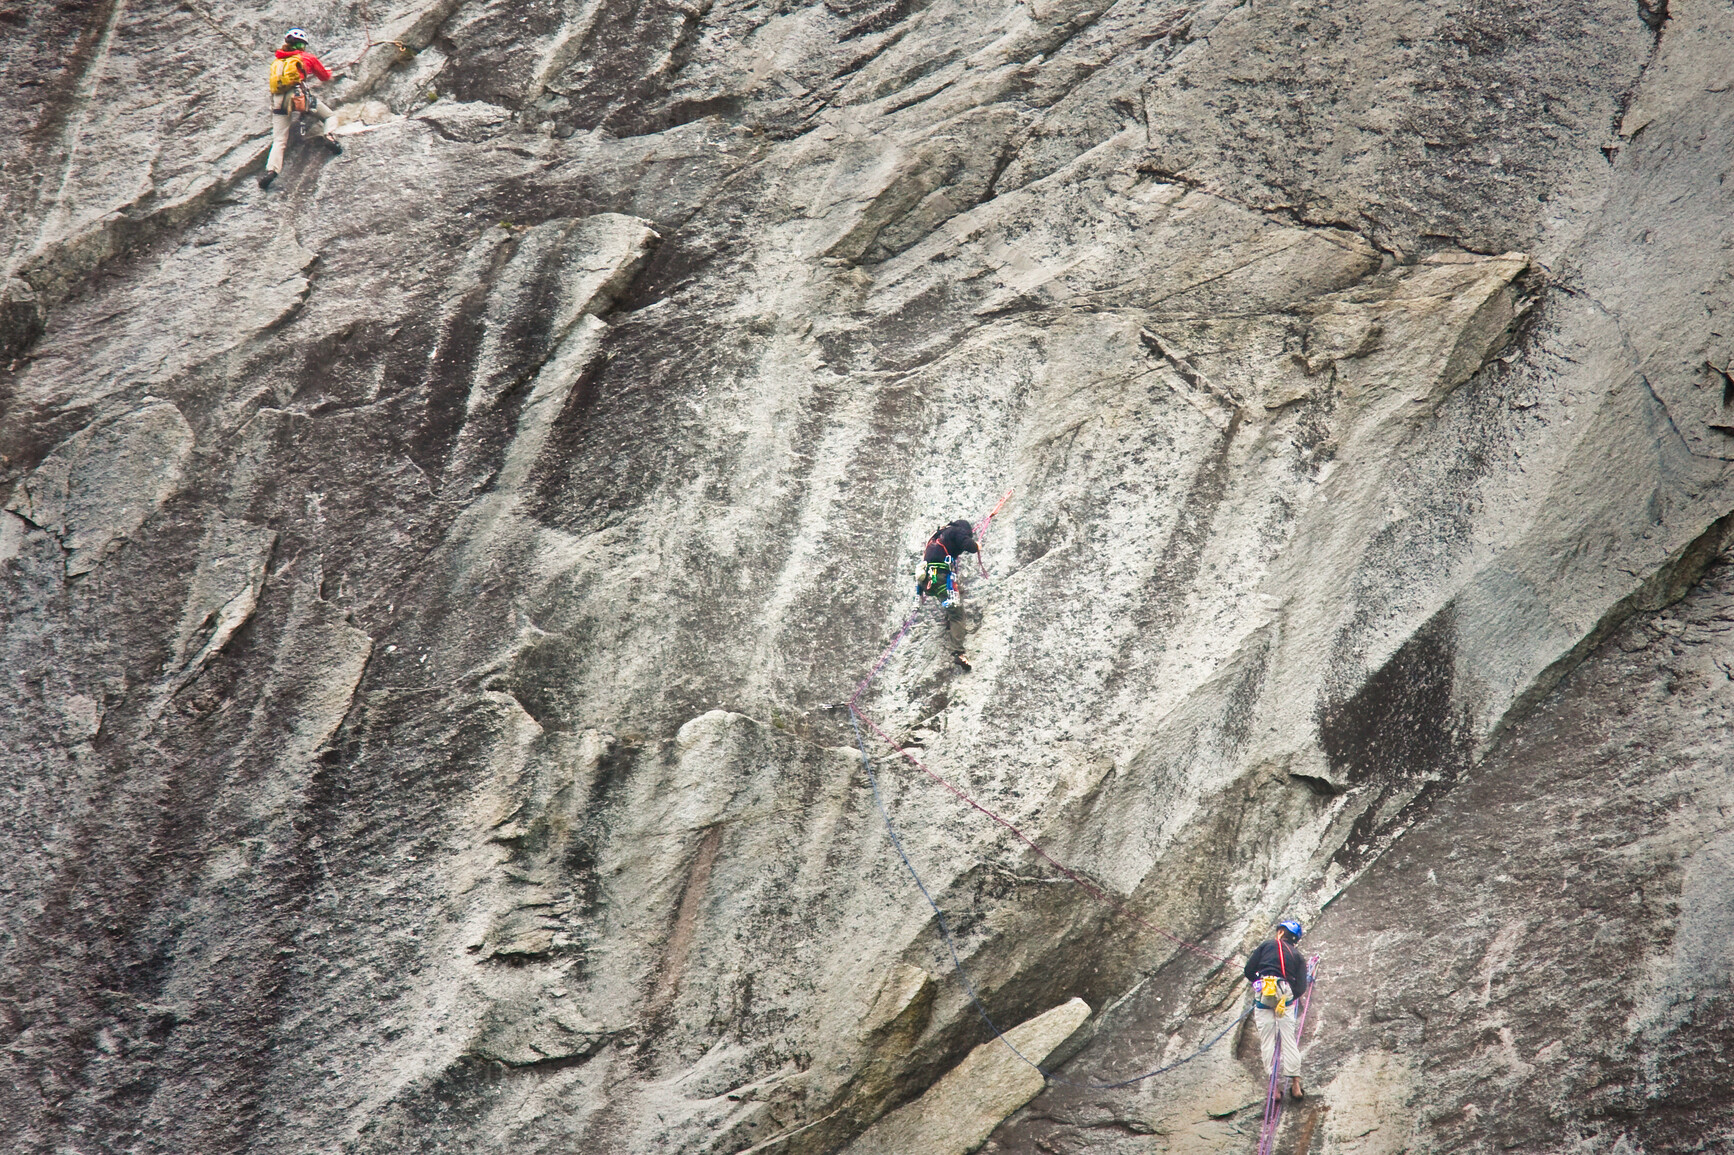 Climbers scaling the face of mountain.